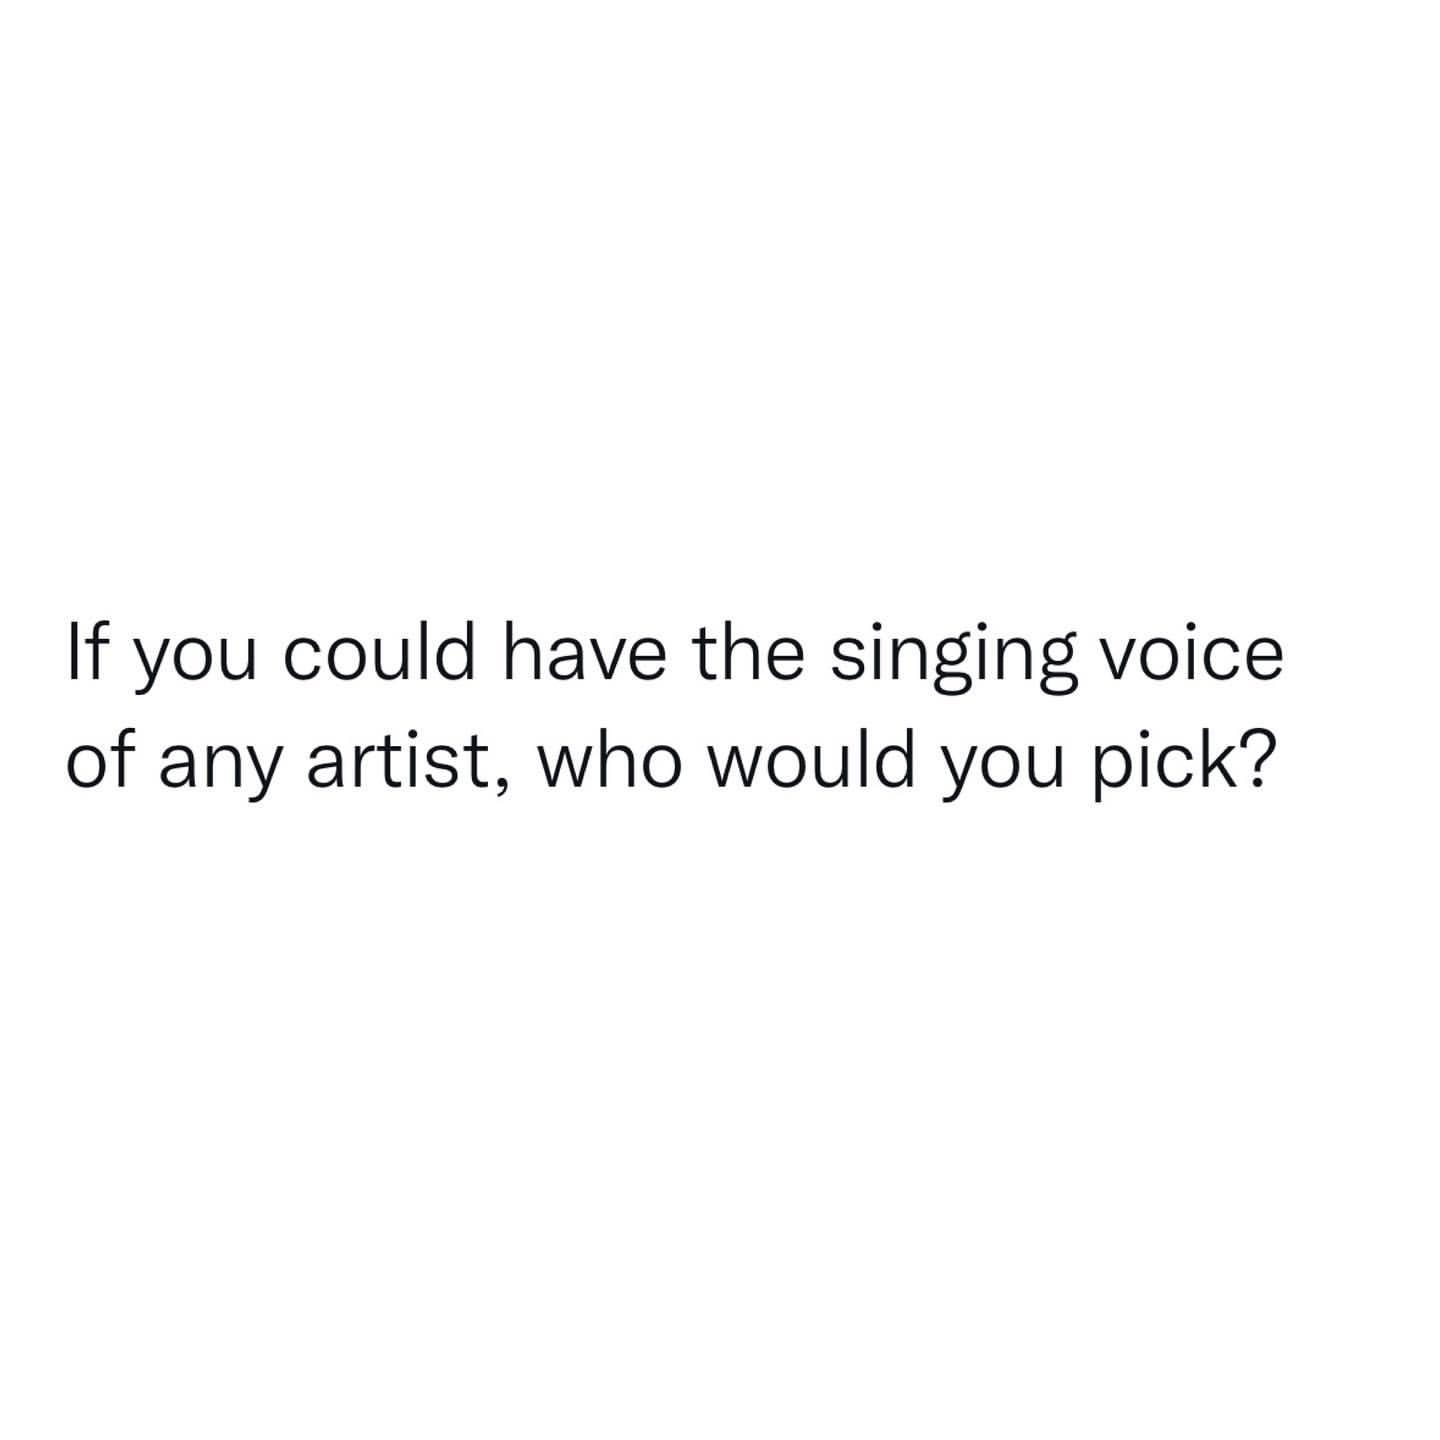 If you could have the singing voice of any artist, who would you pick?